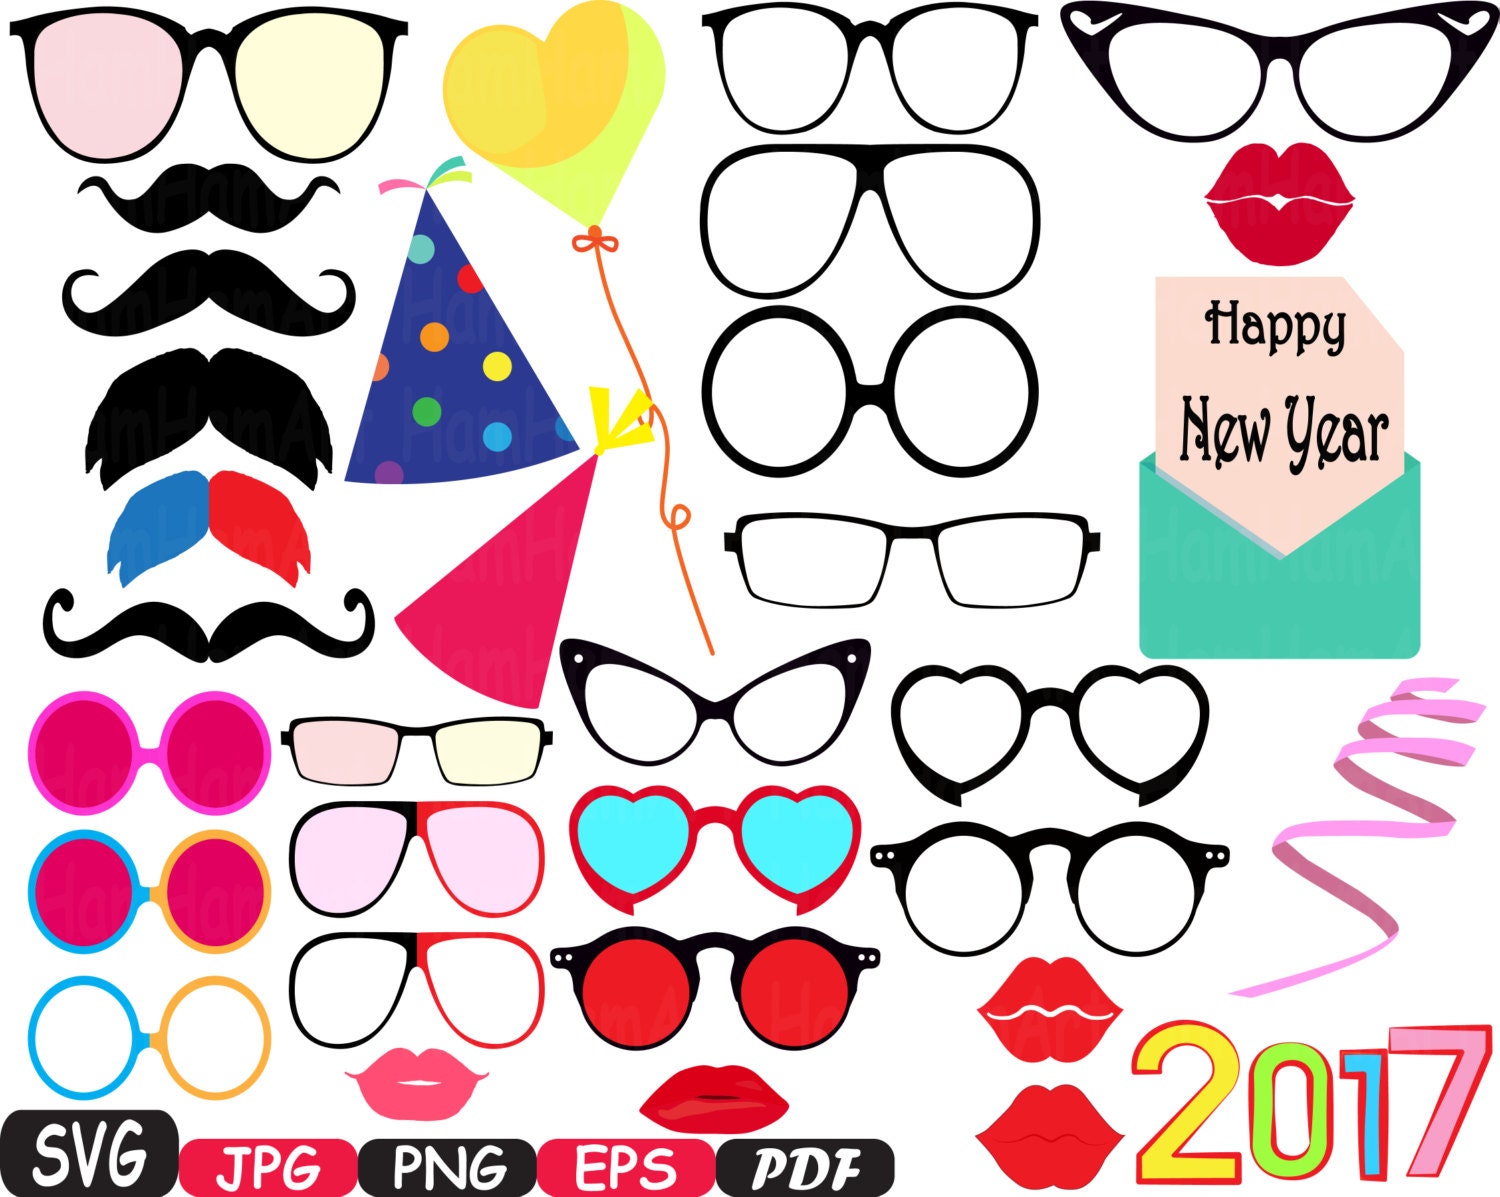 Download Party Photo Booth Prop Emoji Prop Silhouette Happy new ...